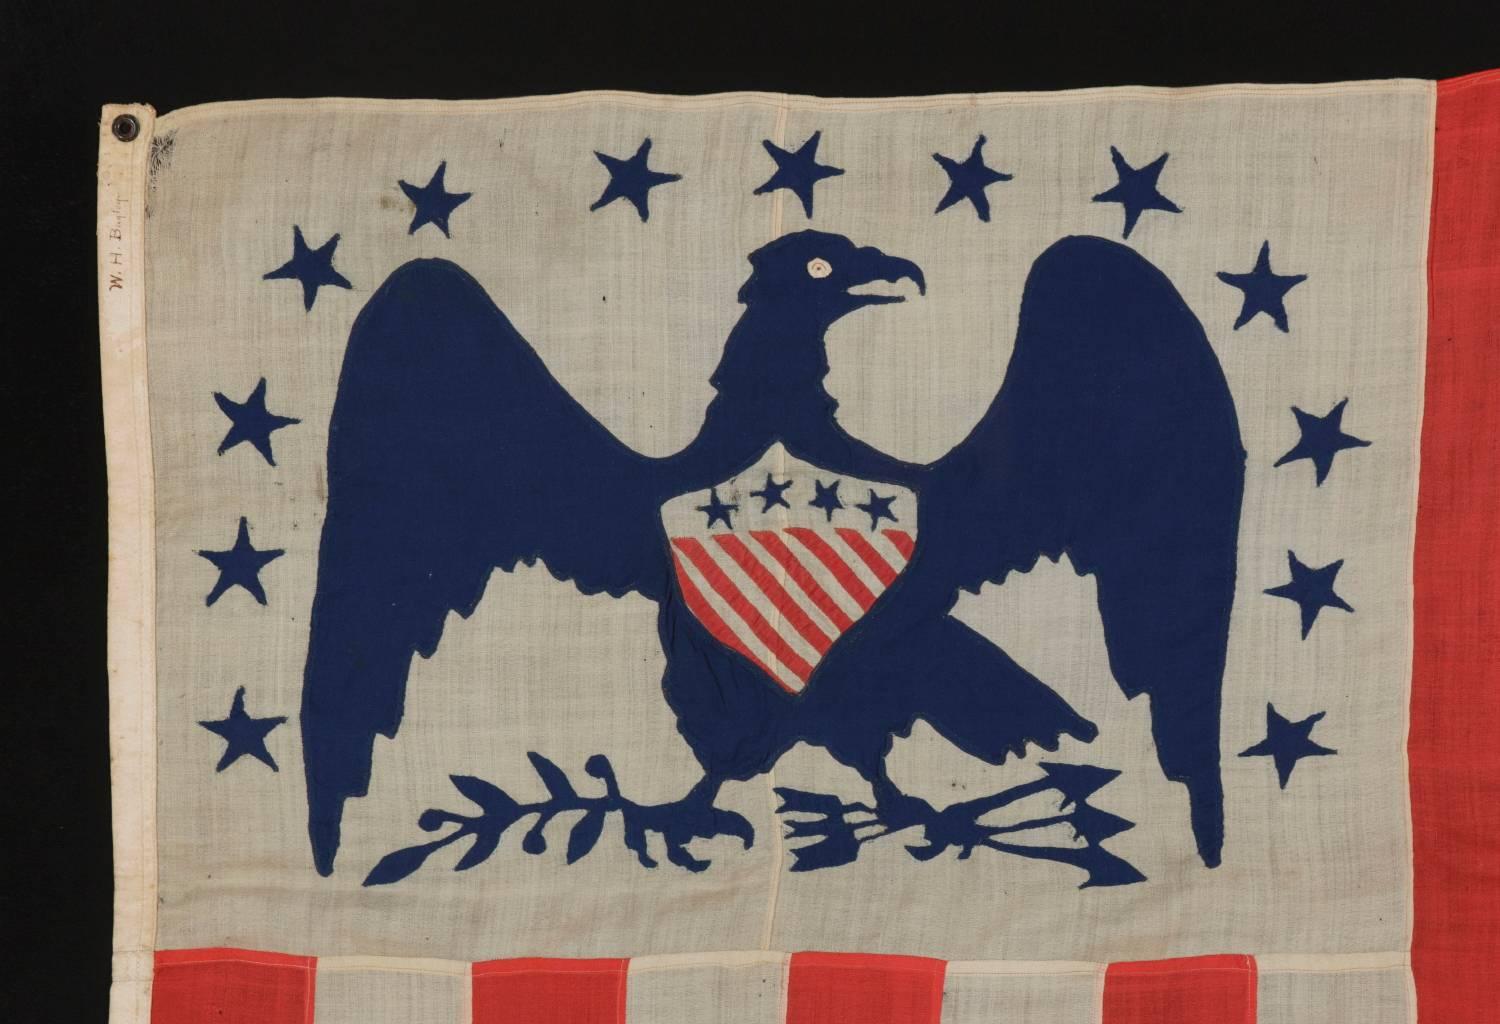 American revenue cutter service ensign (flag) once belonging to captain William Henry Bagley (b. 1838, Durham, Maine), a rare and fantastically visual example, made circa 1870-1880:

United States Revenue Cutter Service ensign, made circa 1870,